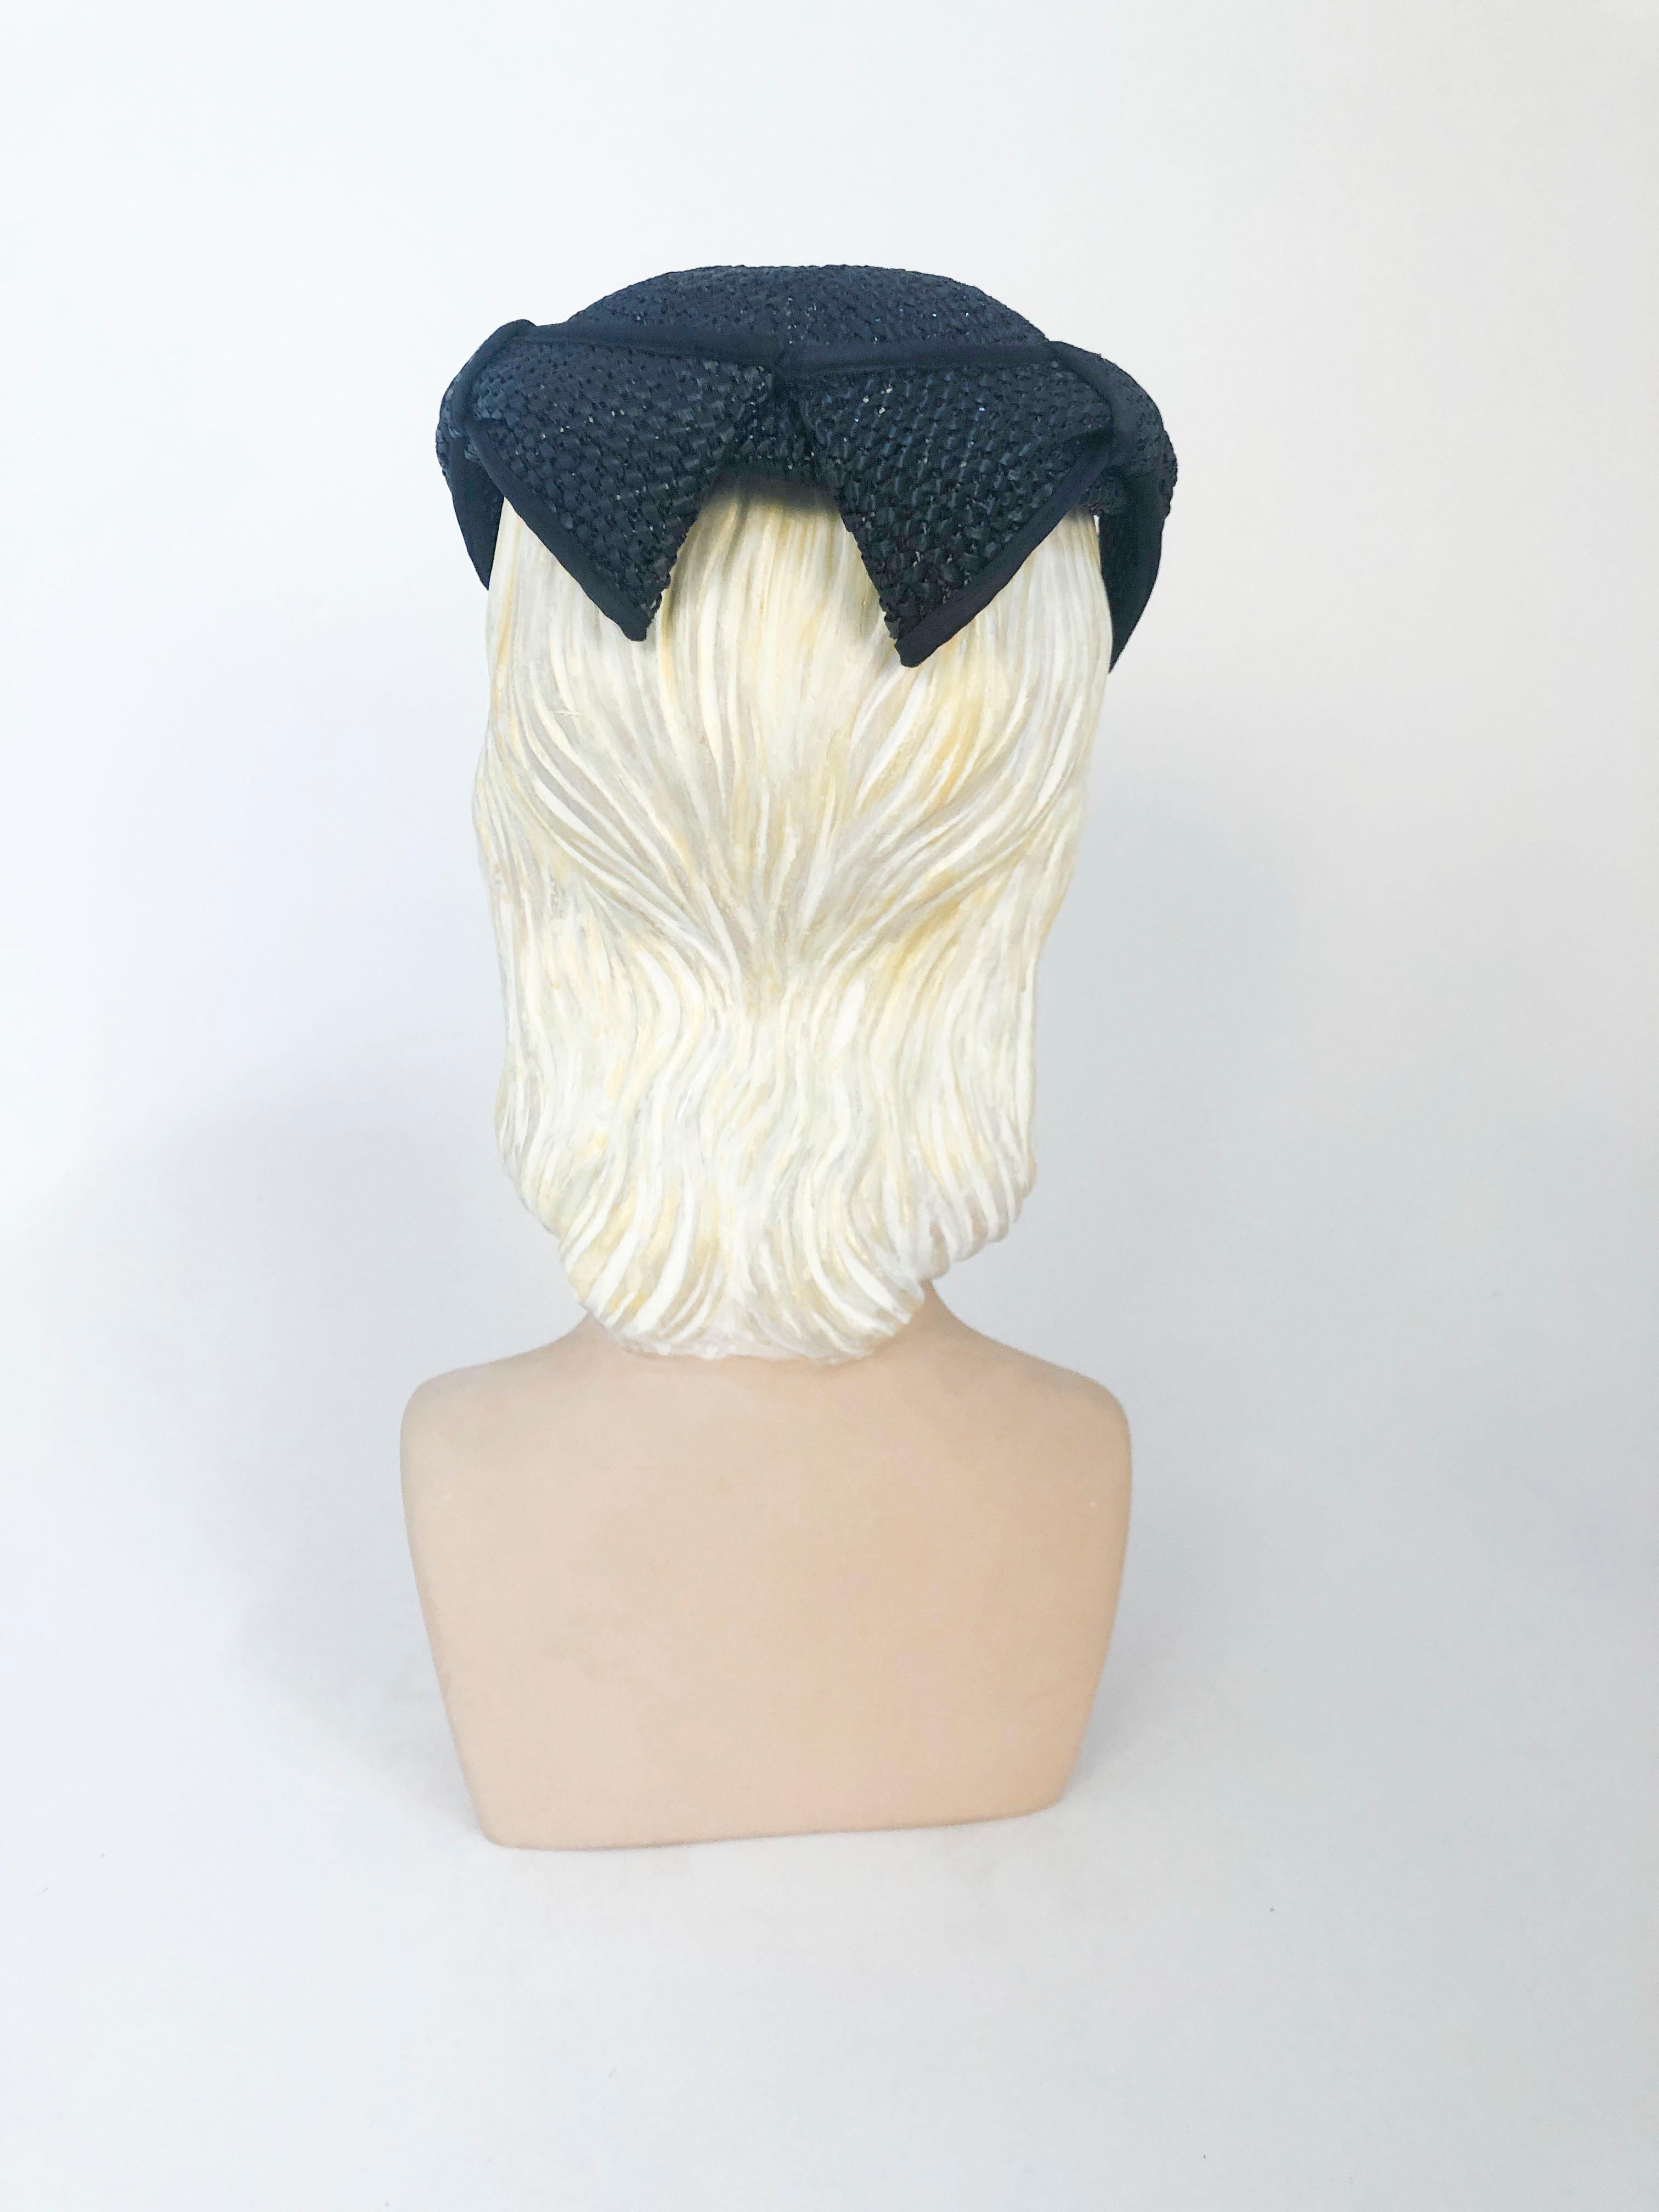 Women's 1950s Navy Woven Raffia Cocktail Hat With Bow and Rhinestone Accents